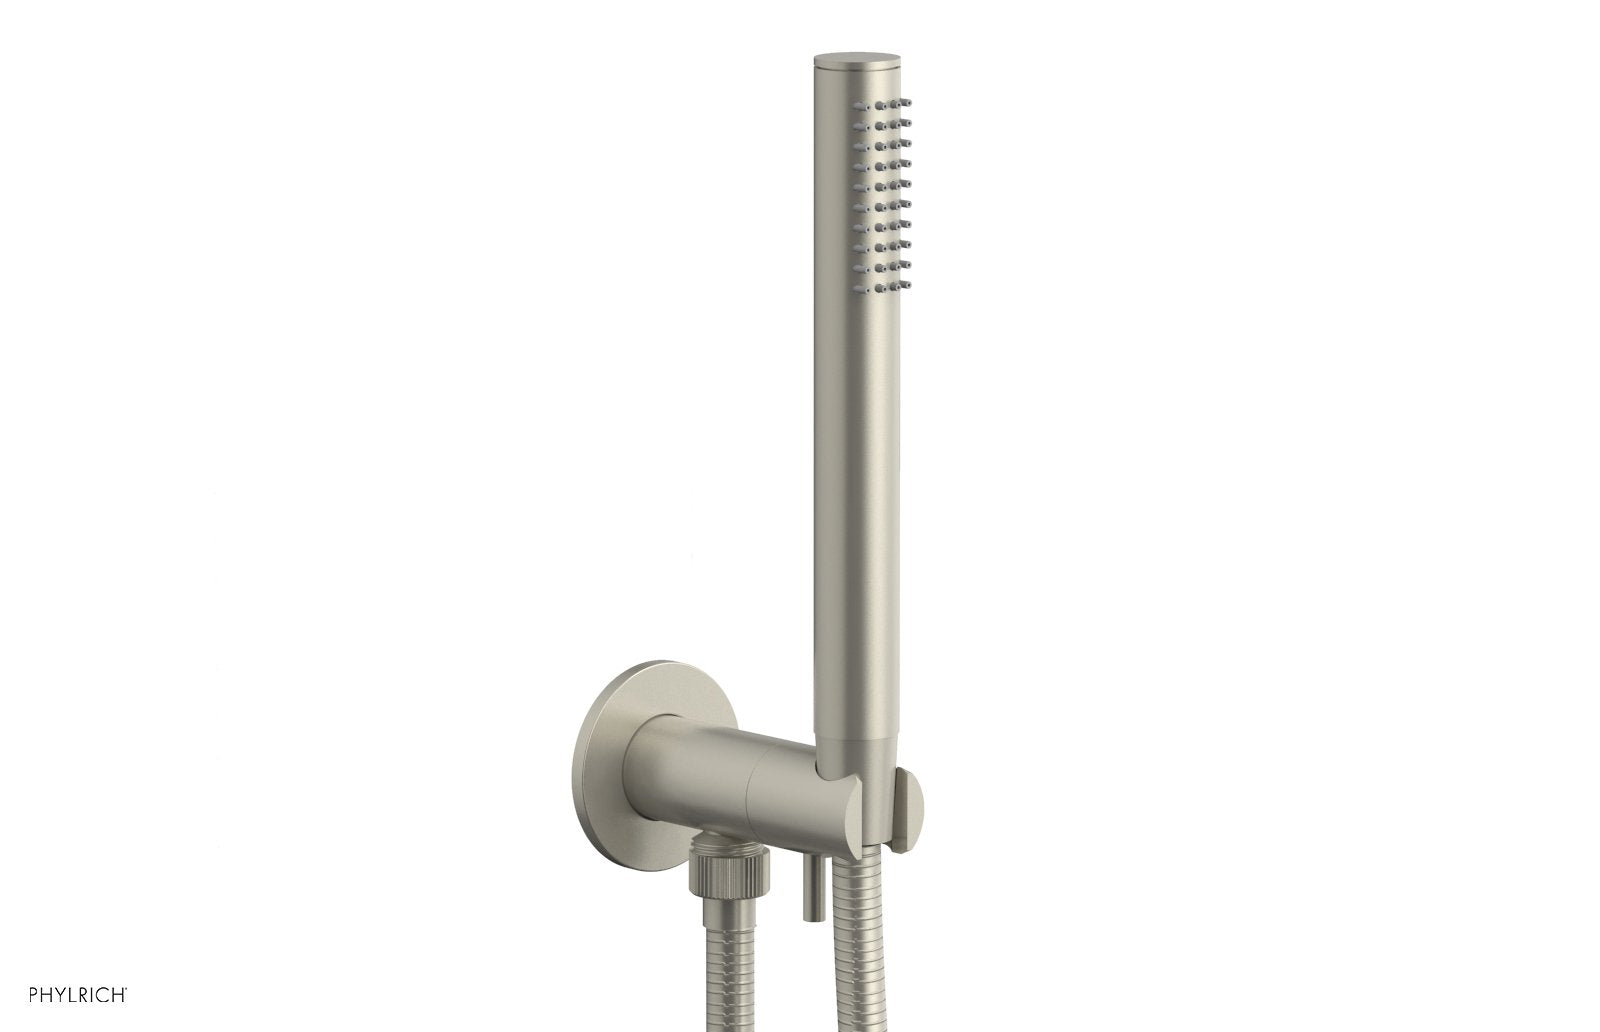 Phylrich BASIC II Hand Shower with Volume Control Kit